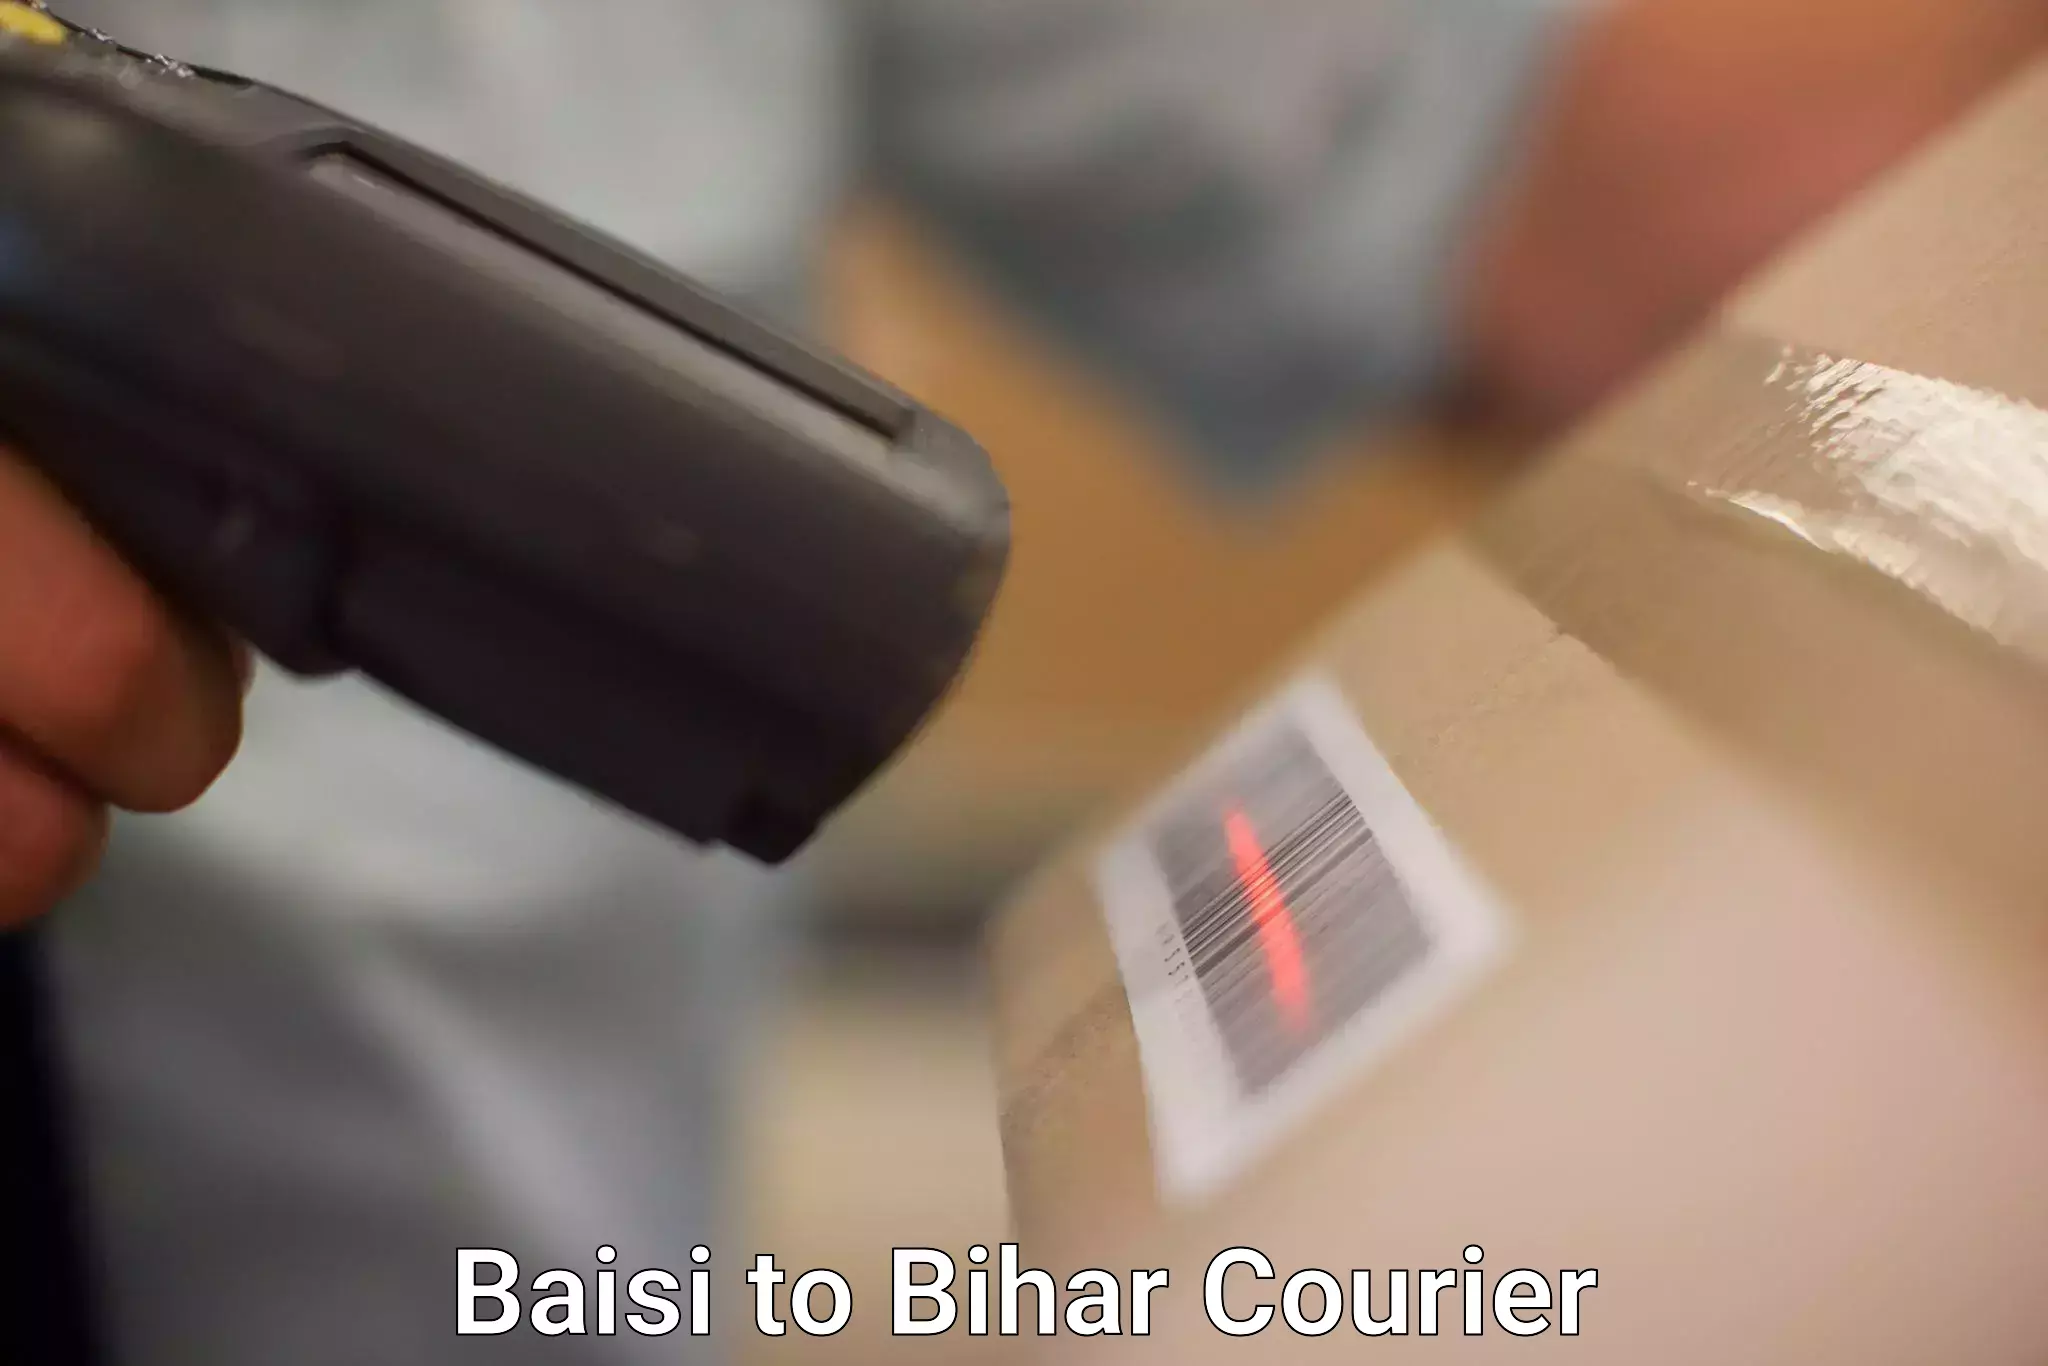 Courier service innovation Baisi to Bihar